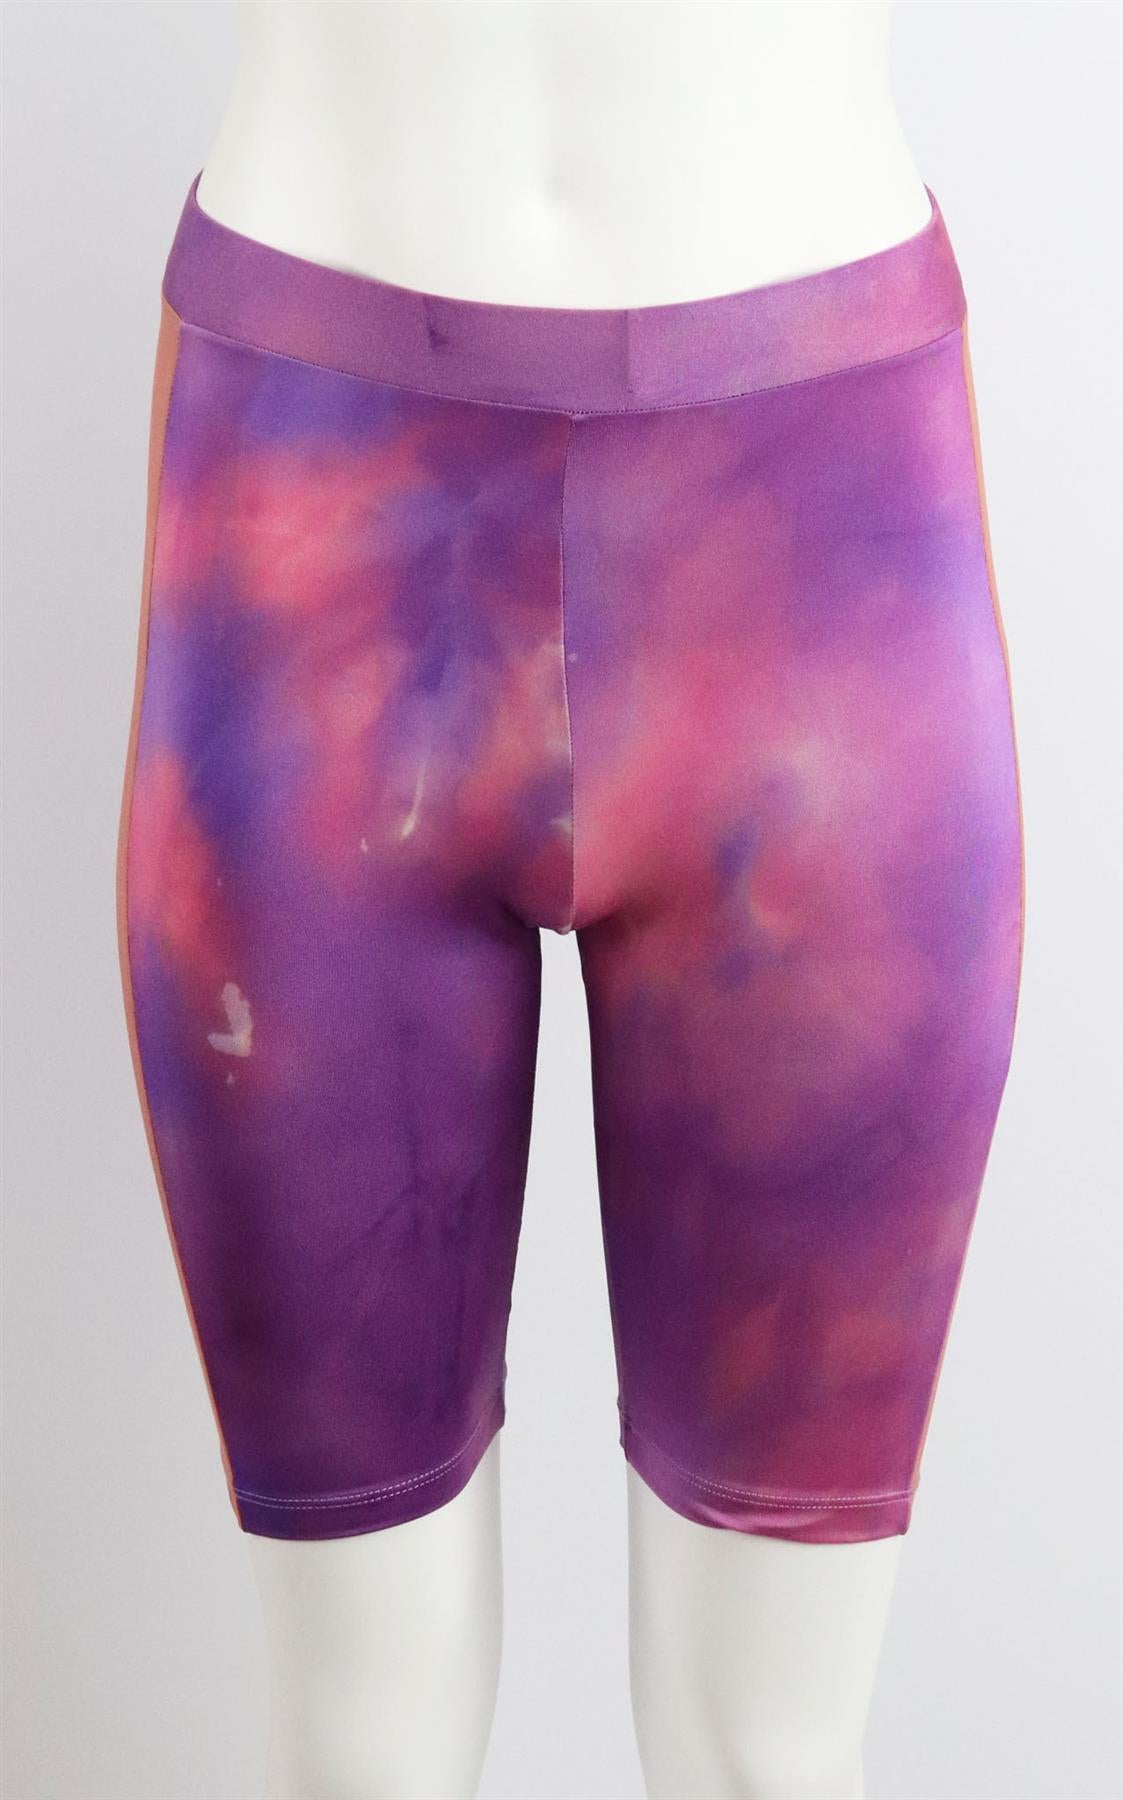 FANTABODY TIE DYED STRETCH JERSEY SHORTS SMALL